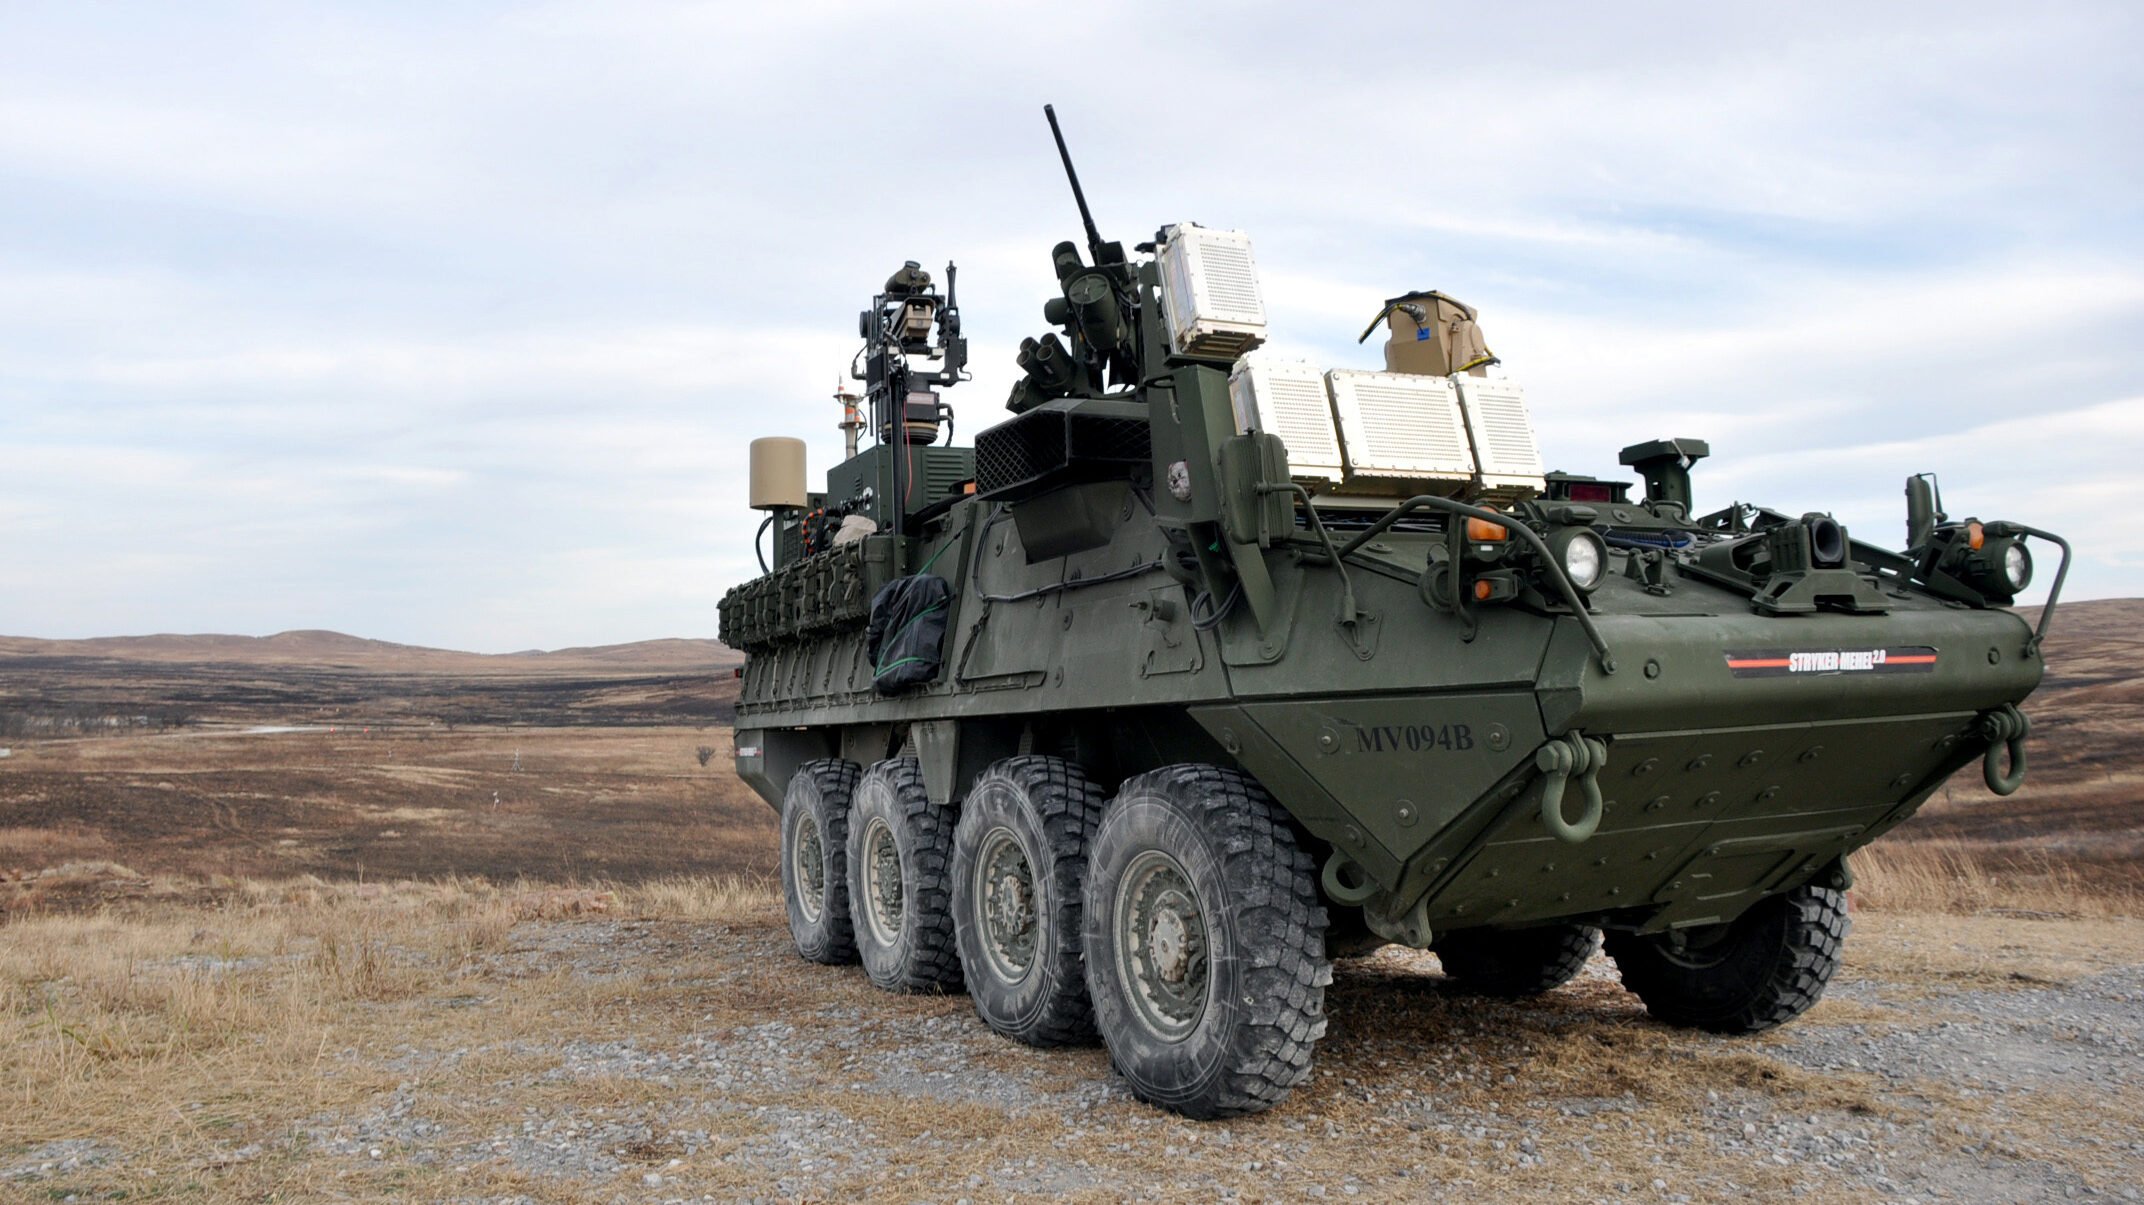 ‘Bullet made out of light’: Army to field first Stryker-mounted combat laser in next 45 days